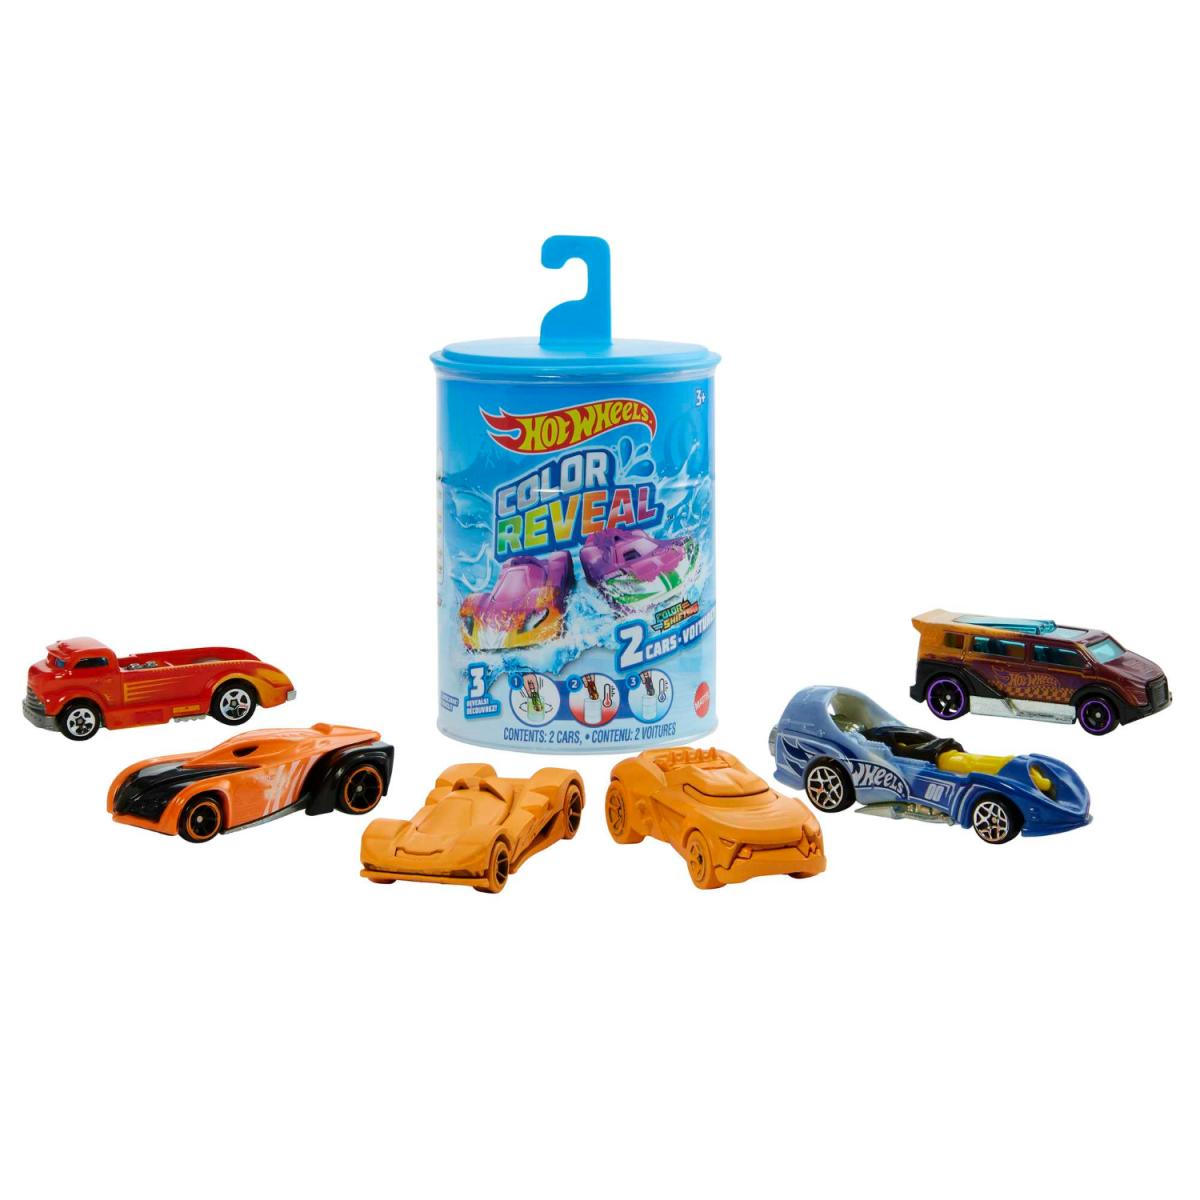 HOTWHEELS 2 PACK COLOR REVEAL